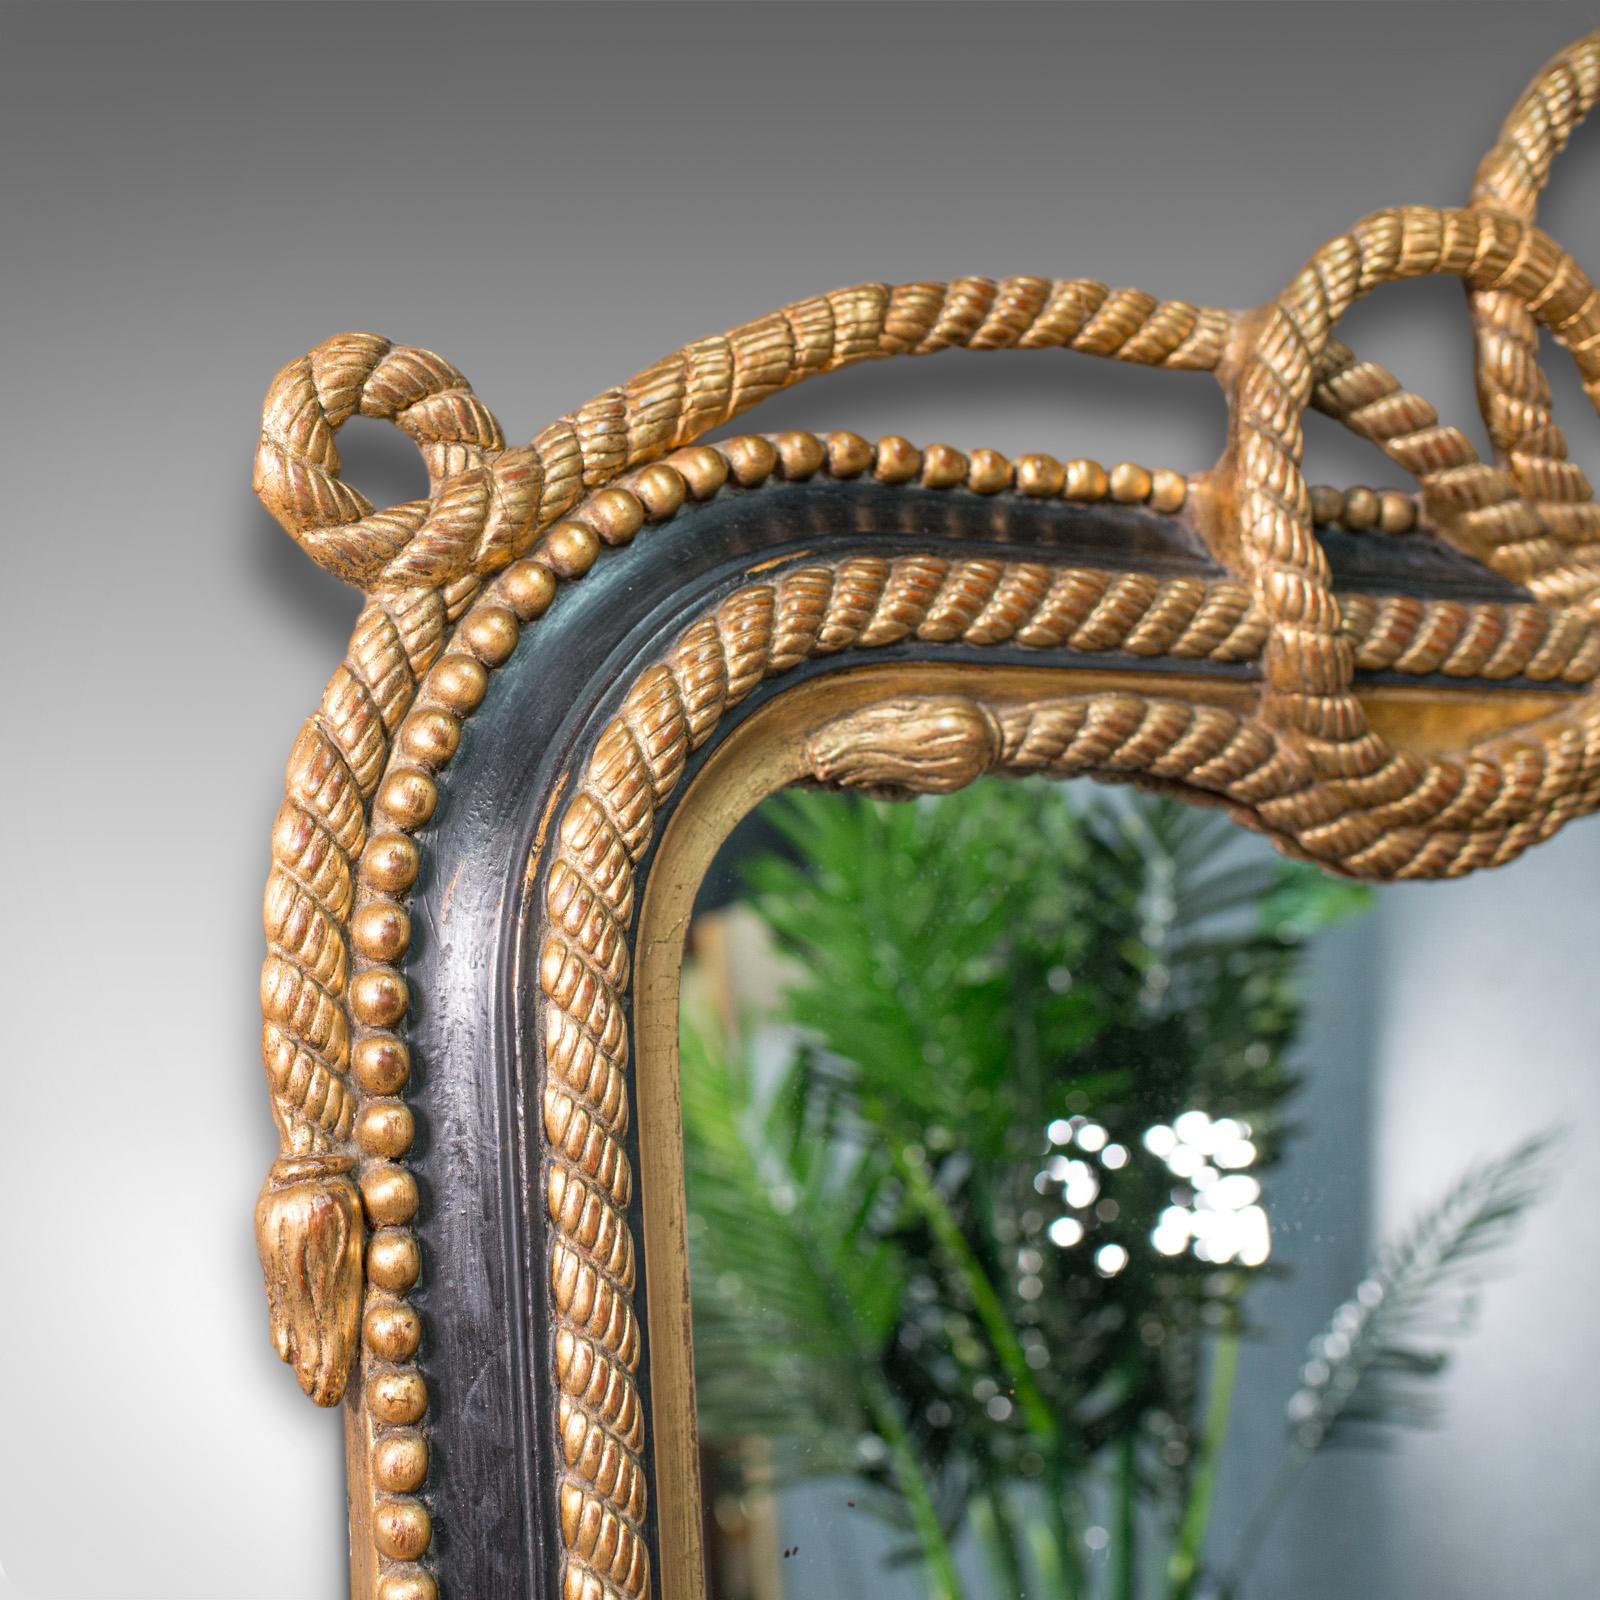 Giltwood Very Large Antique Wall Mirror, English, Gilt, Overmantel, Dressing, Regency